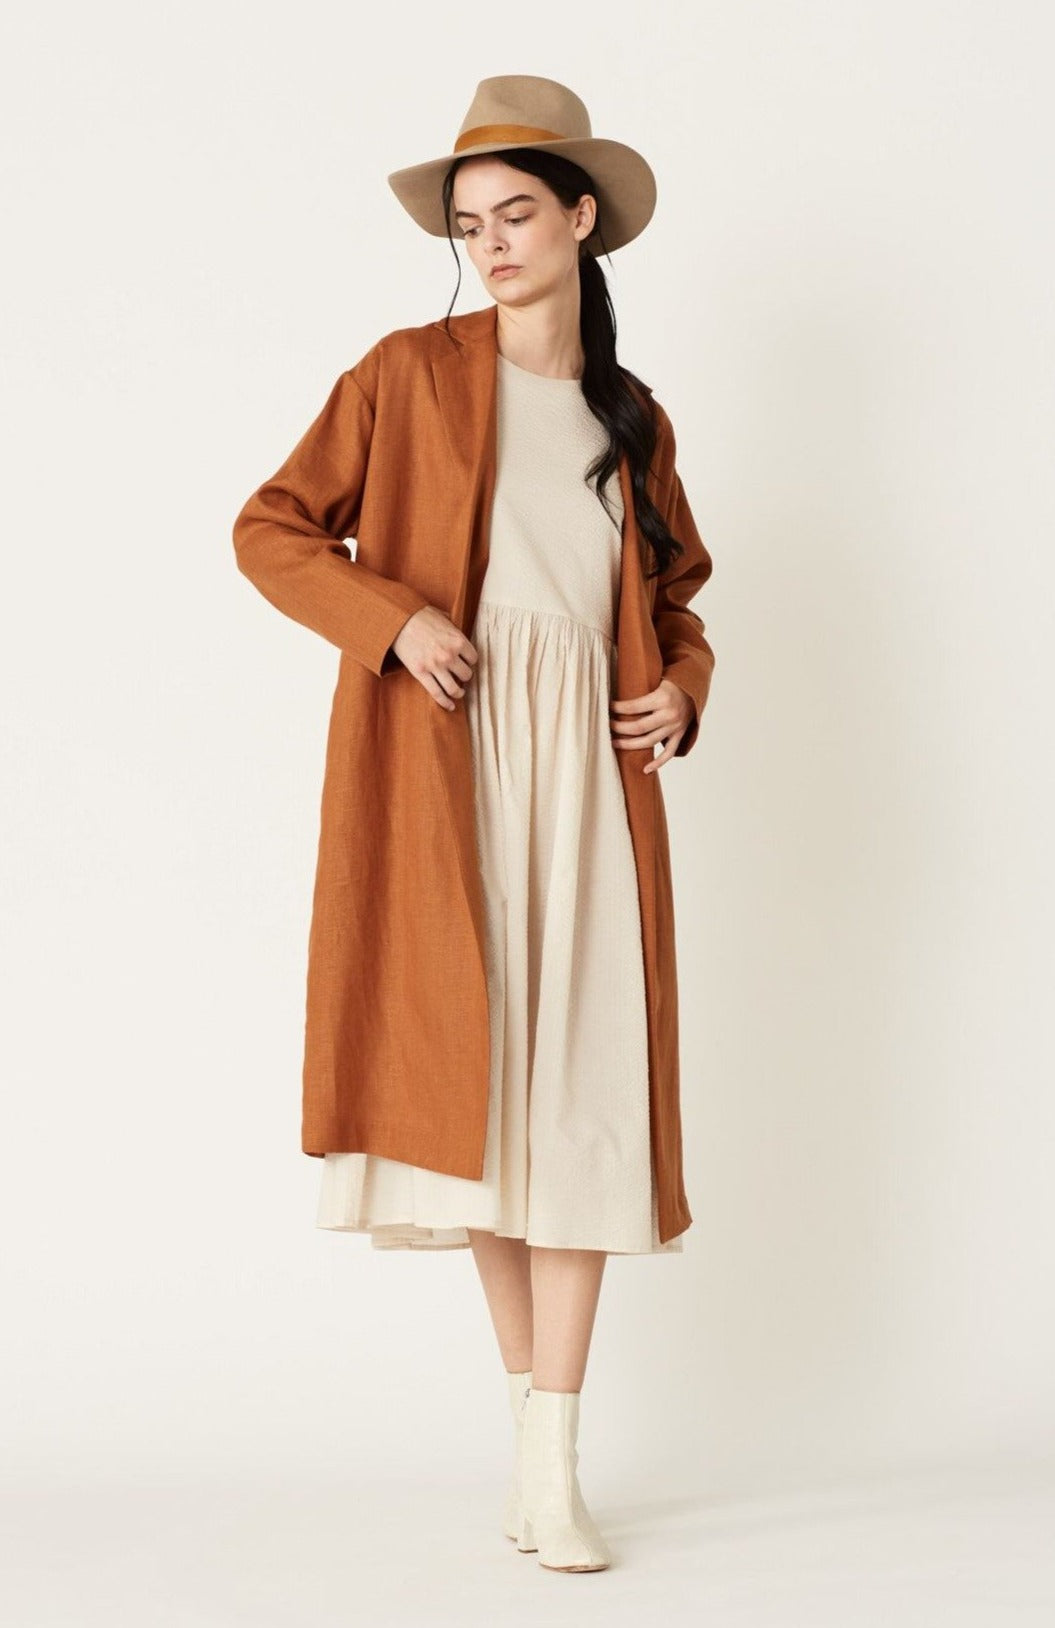 Ms. Rosalee Linen Long Sleeve Coat in Ocre Linen. Made in Atlanta, ethically and sustainably, by slow fashion designer Megan Huntz. 